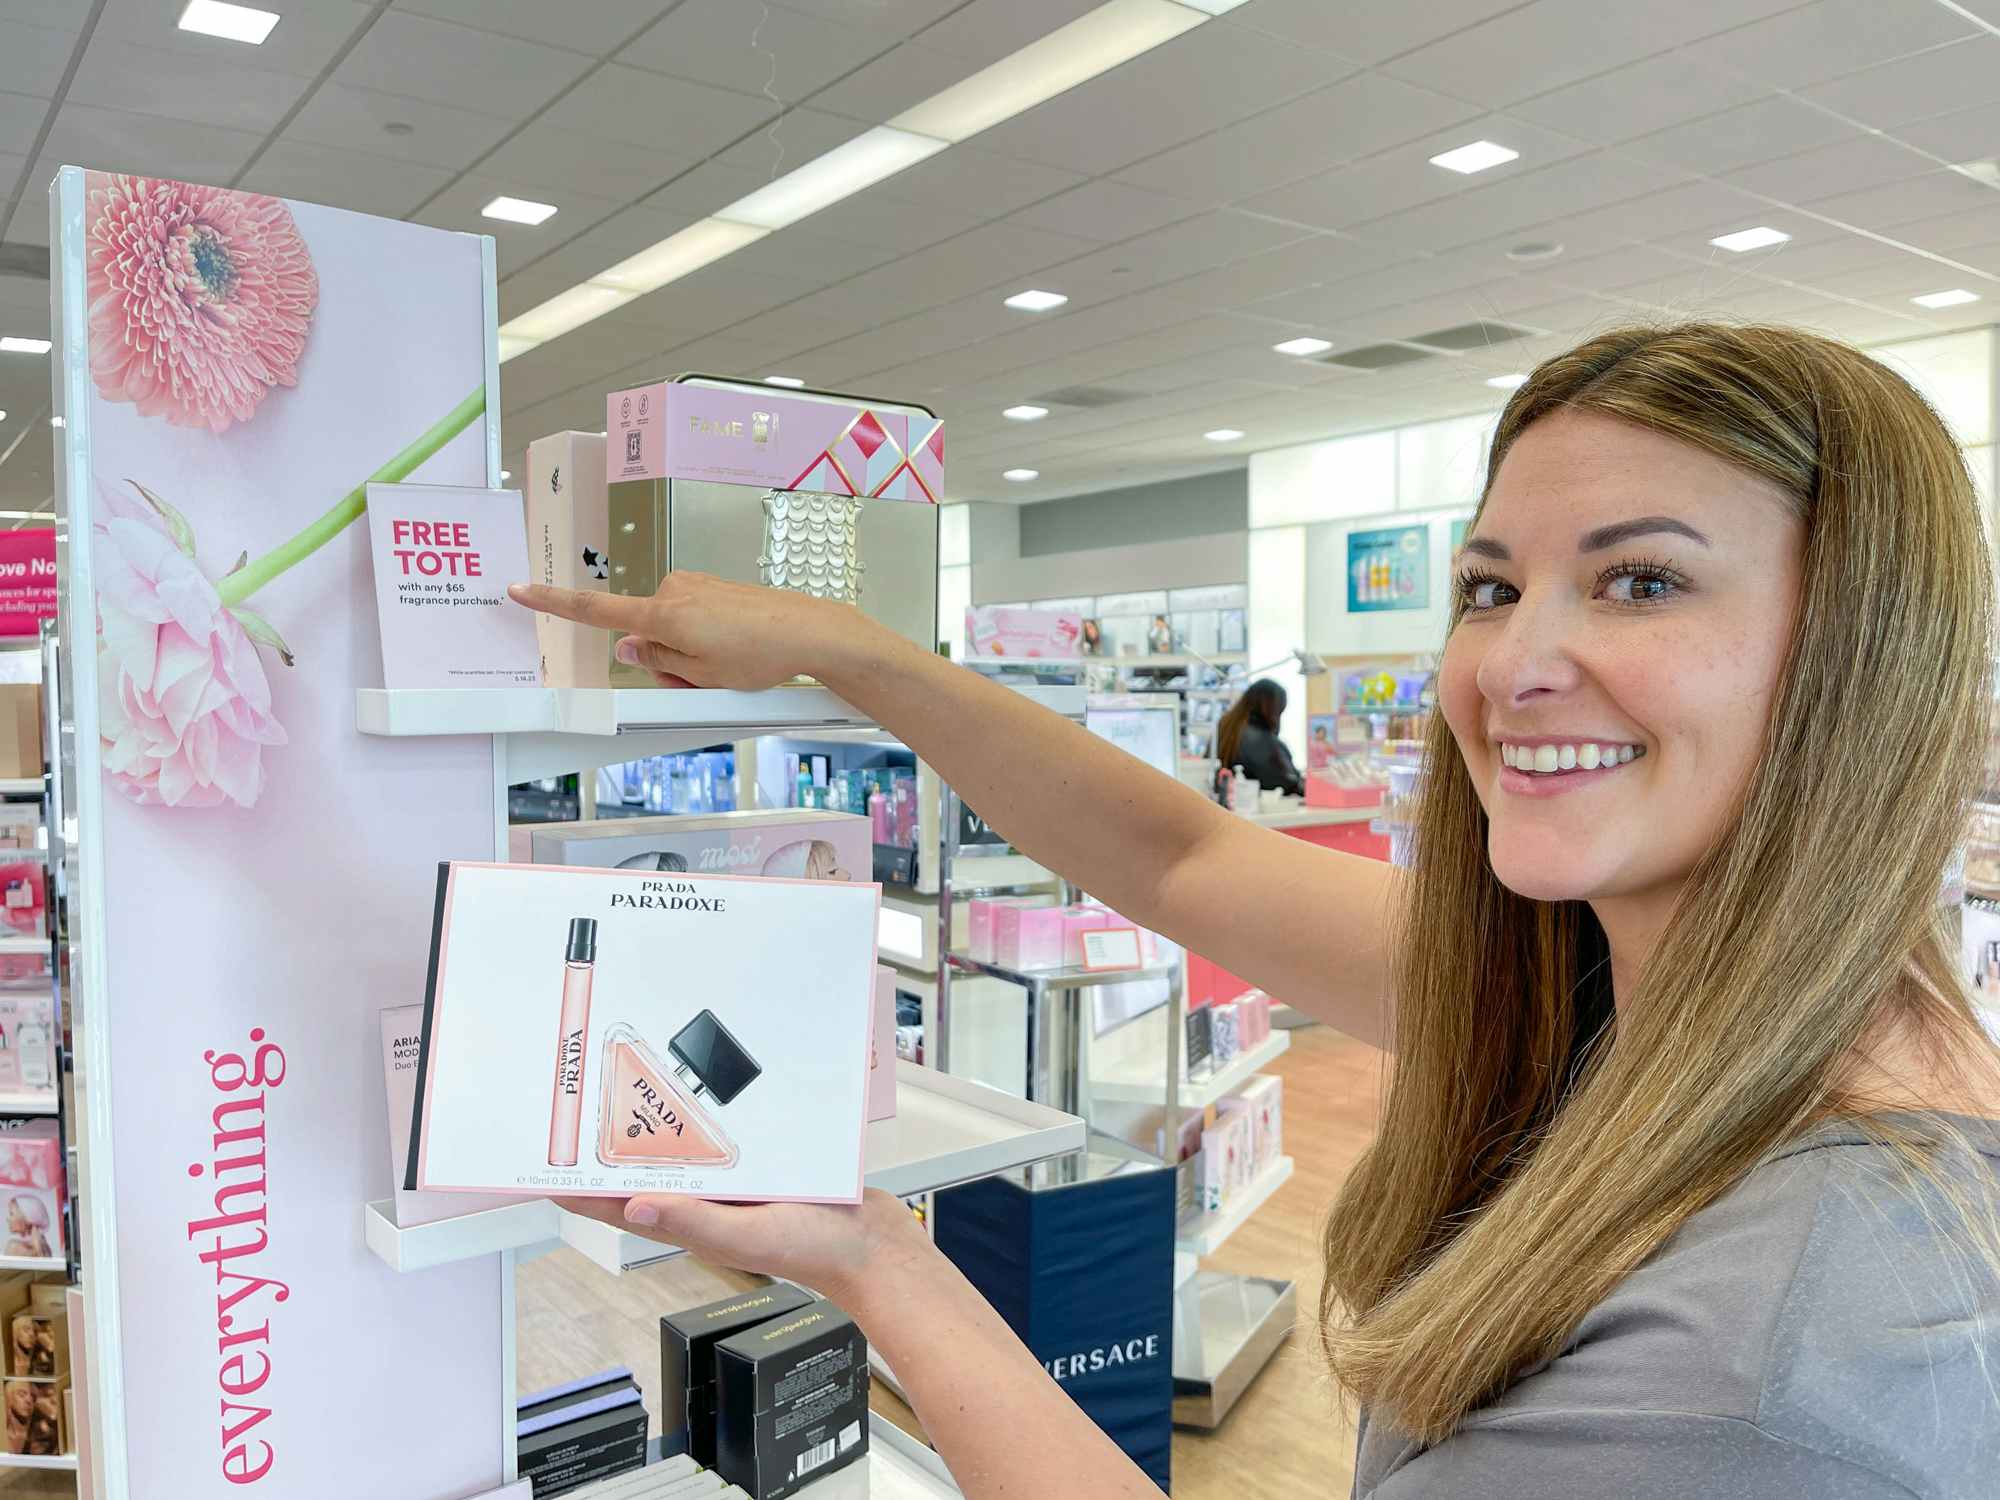 A person holding a fragrance product and pointing to a sign advertising a free tote with purchase